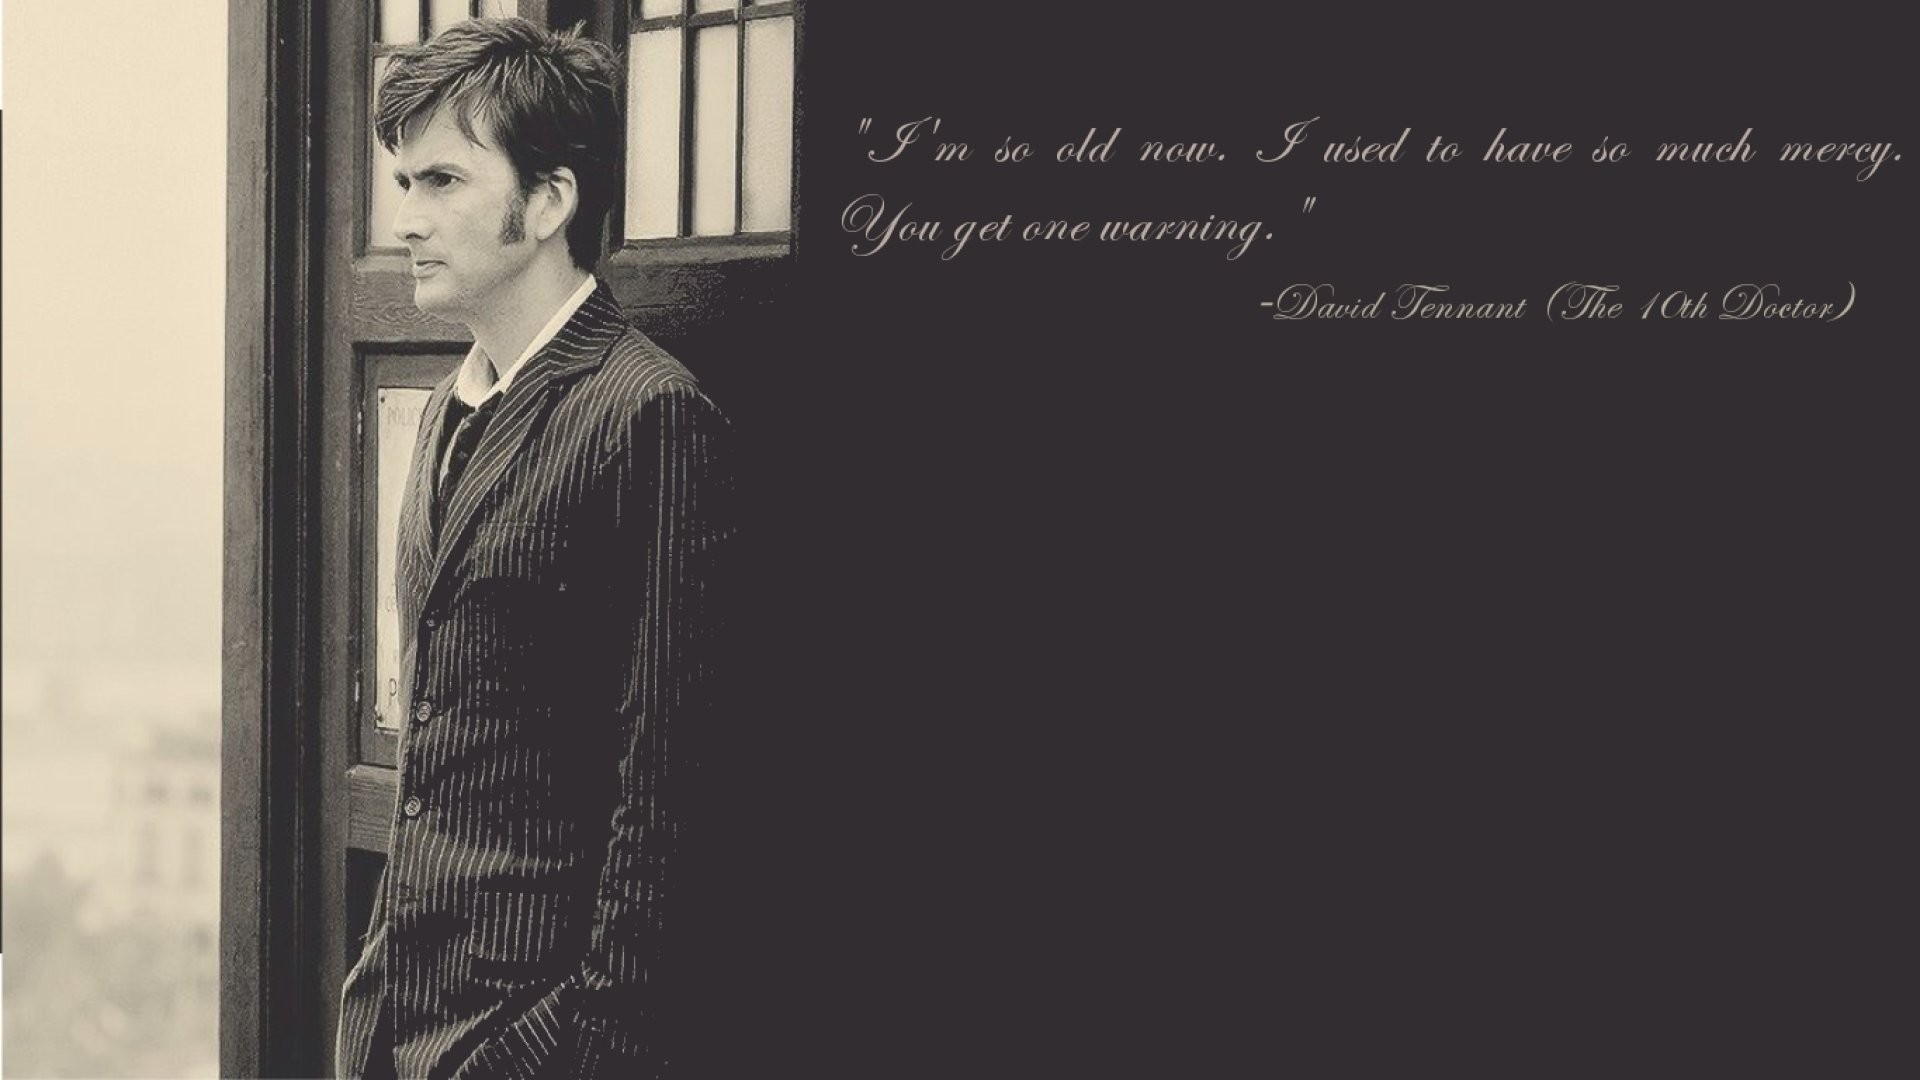 Sad 10th Doctor Quotes - HD Wallpaper 